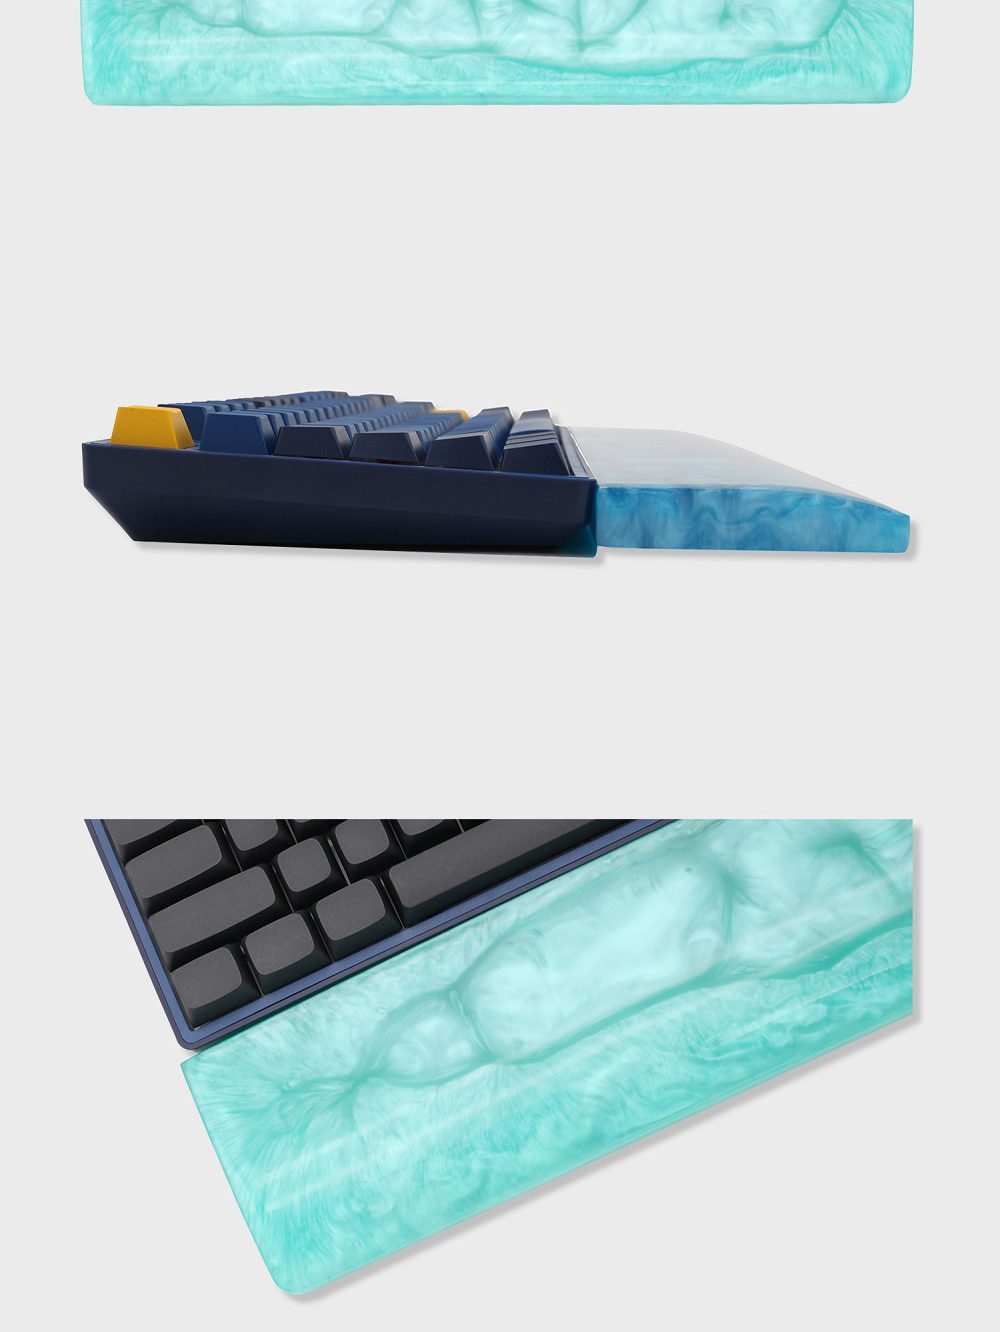 LOOP Resin Wrist Rest Handmade Wrist with Rubber feet for mechanical keyboards gh60 xd60 xd64 60% Poker 87